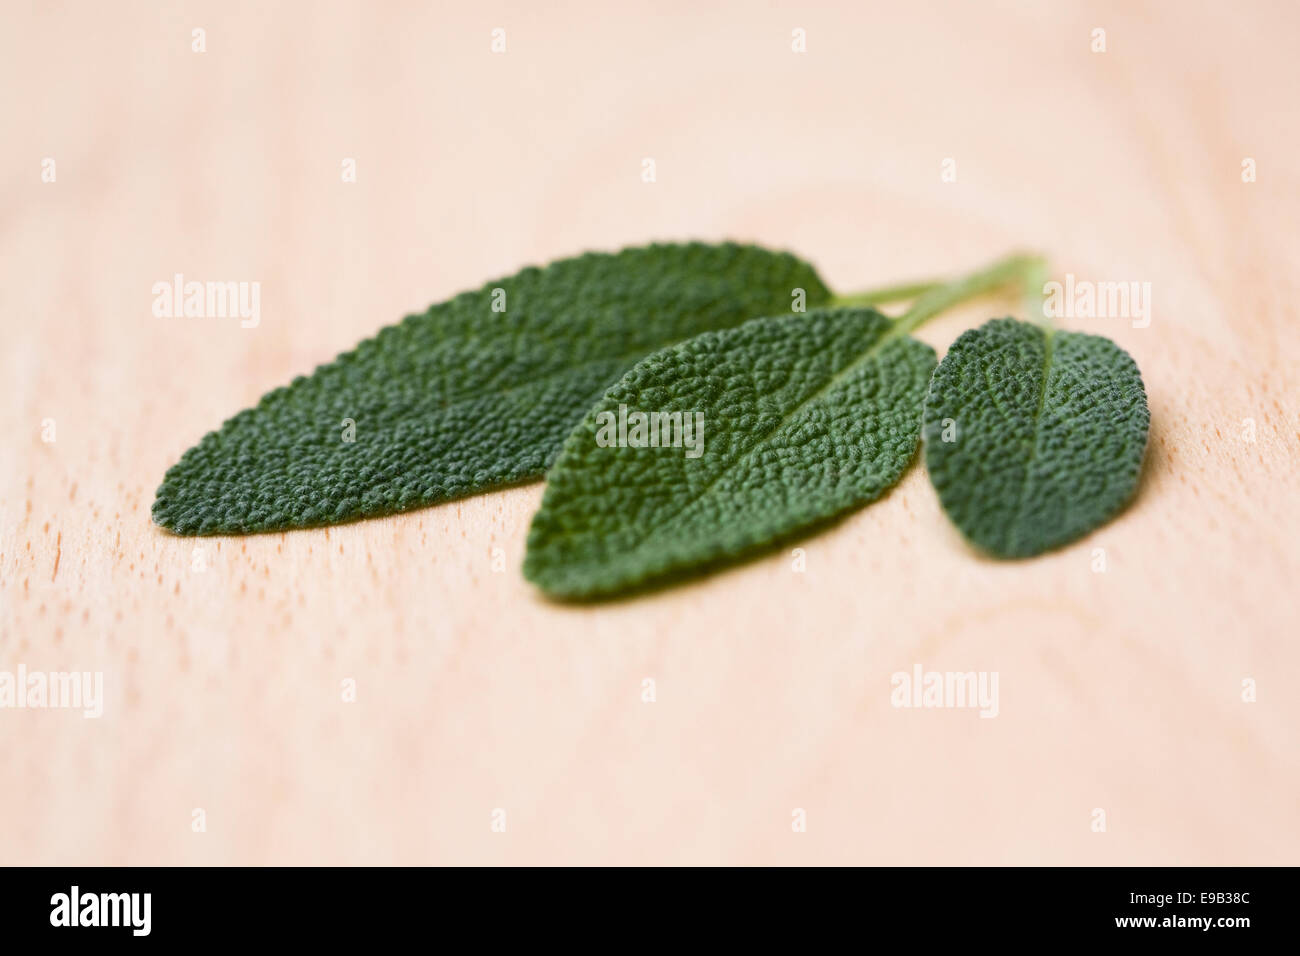 Salvia officinalis. Three Sage leaves on a wooden board. Stock Photo